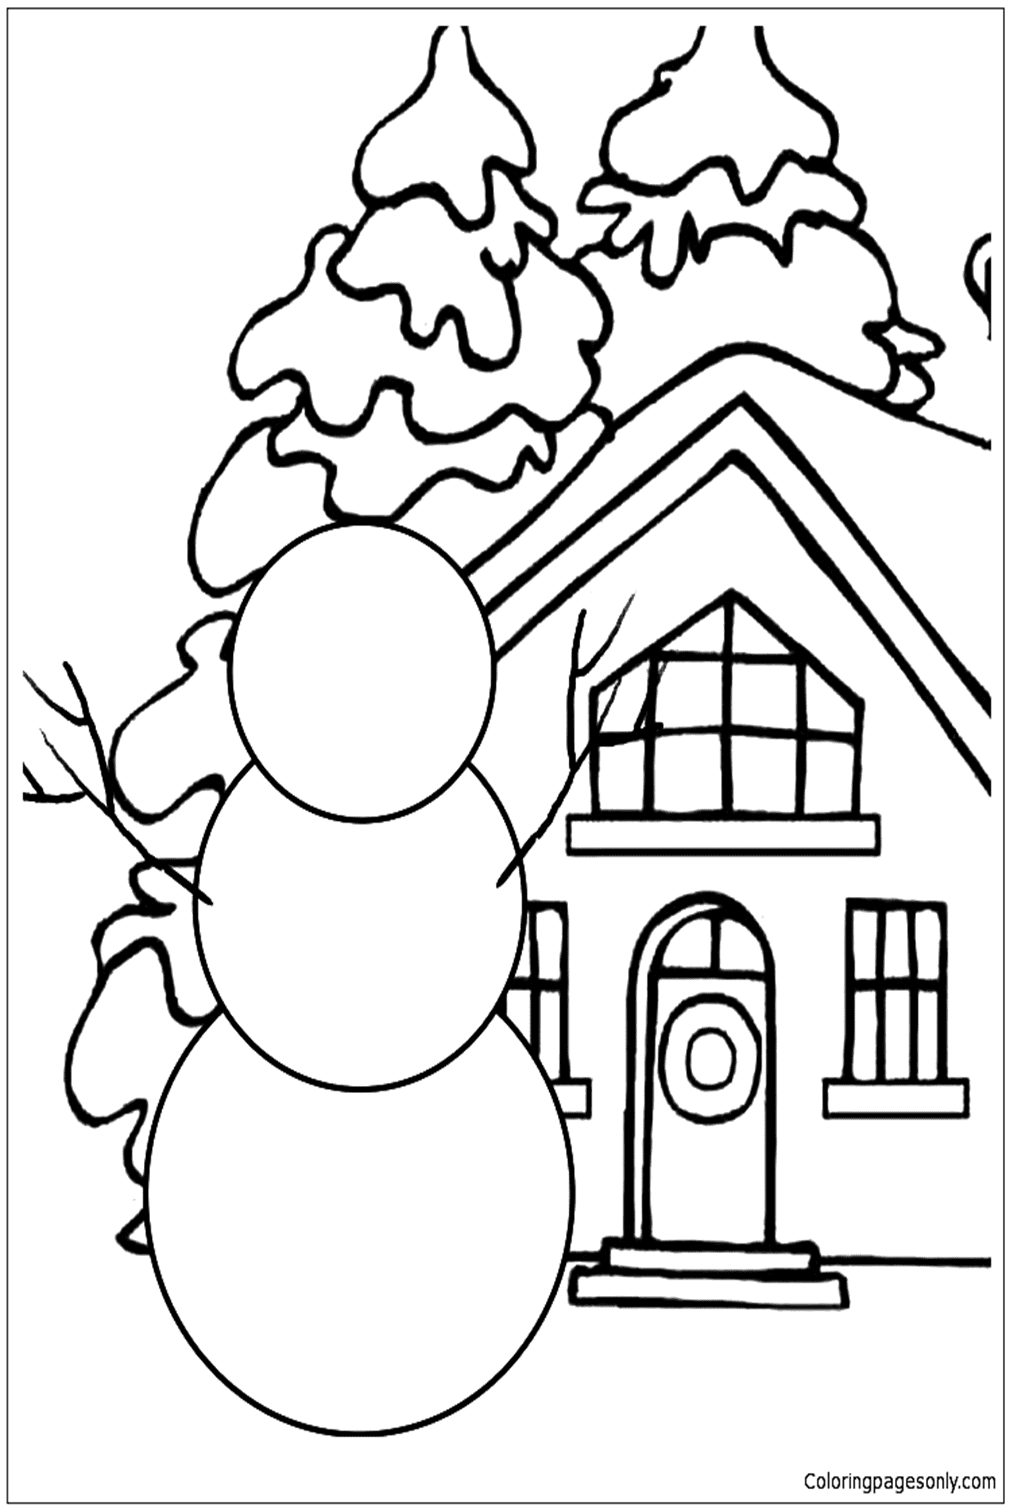 Build Your Own Snowman Coloring Pages